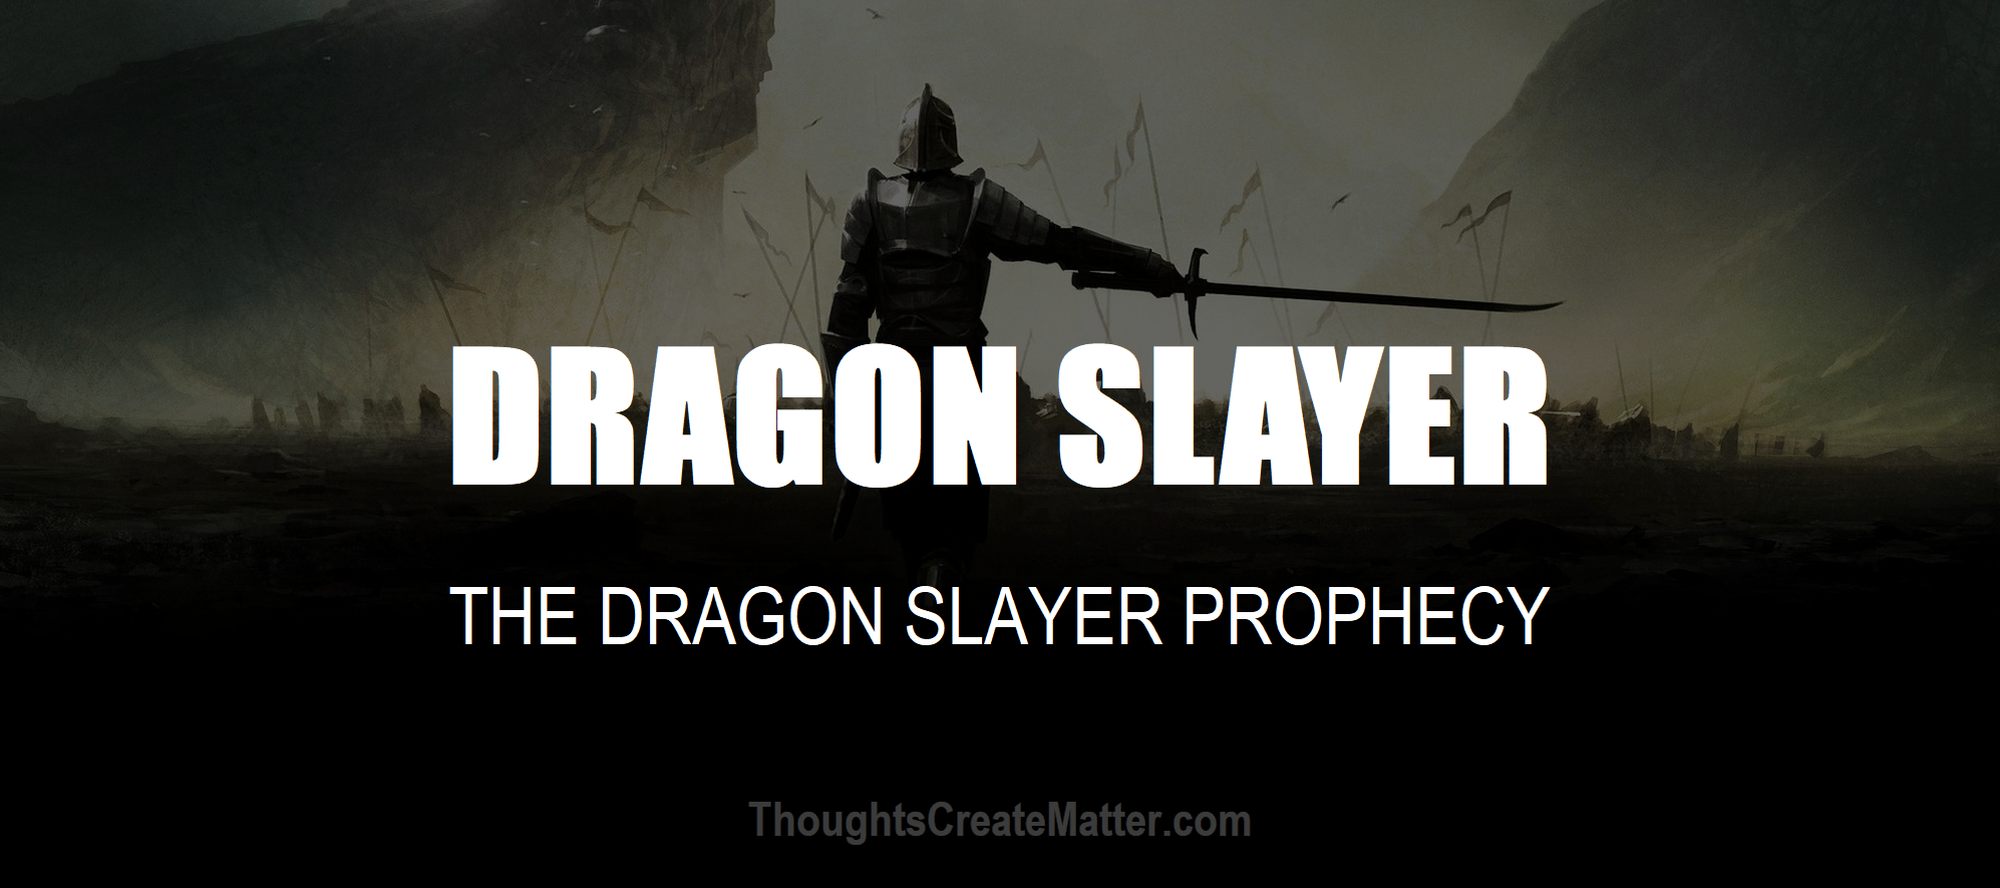 Dragon slayer depicts william-eastwood-empath-visionary-what-is-the-the-dragon-slayer-book